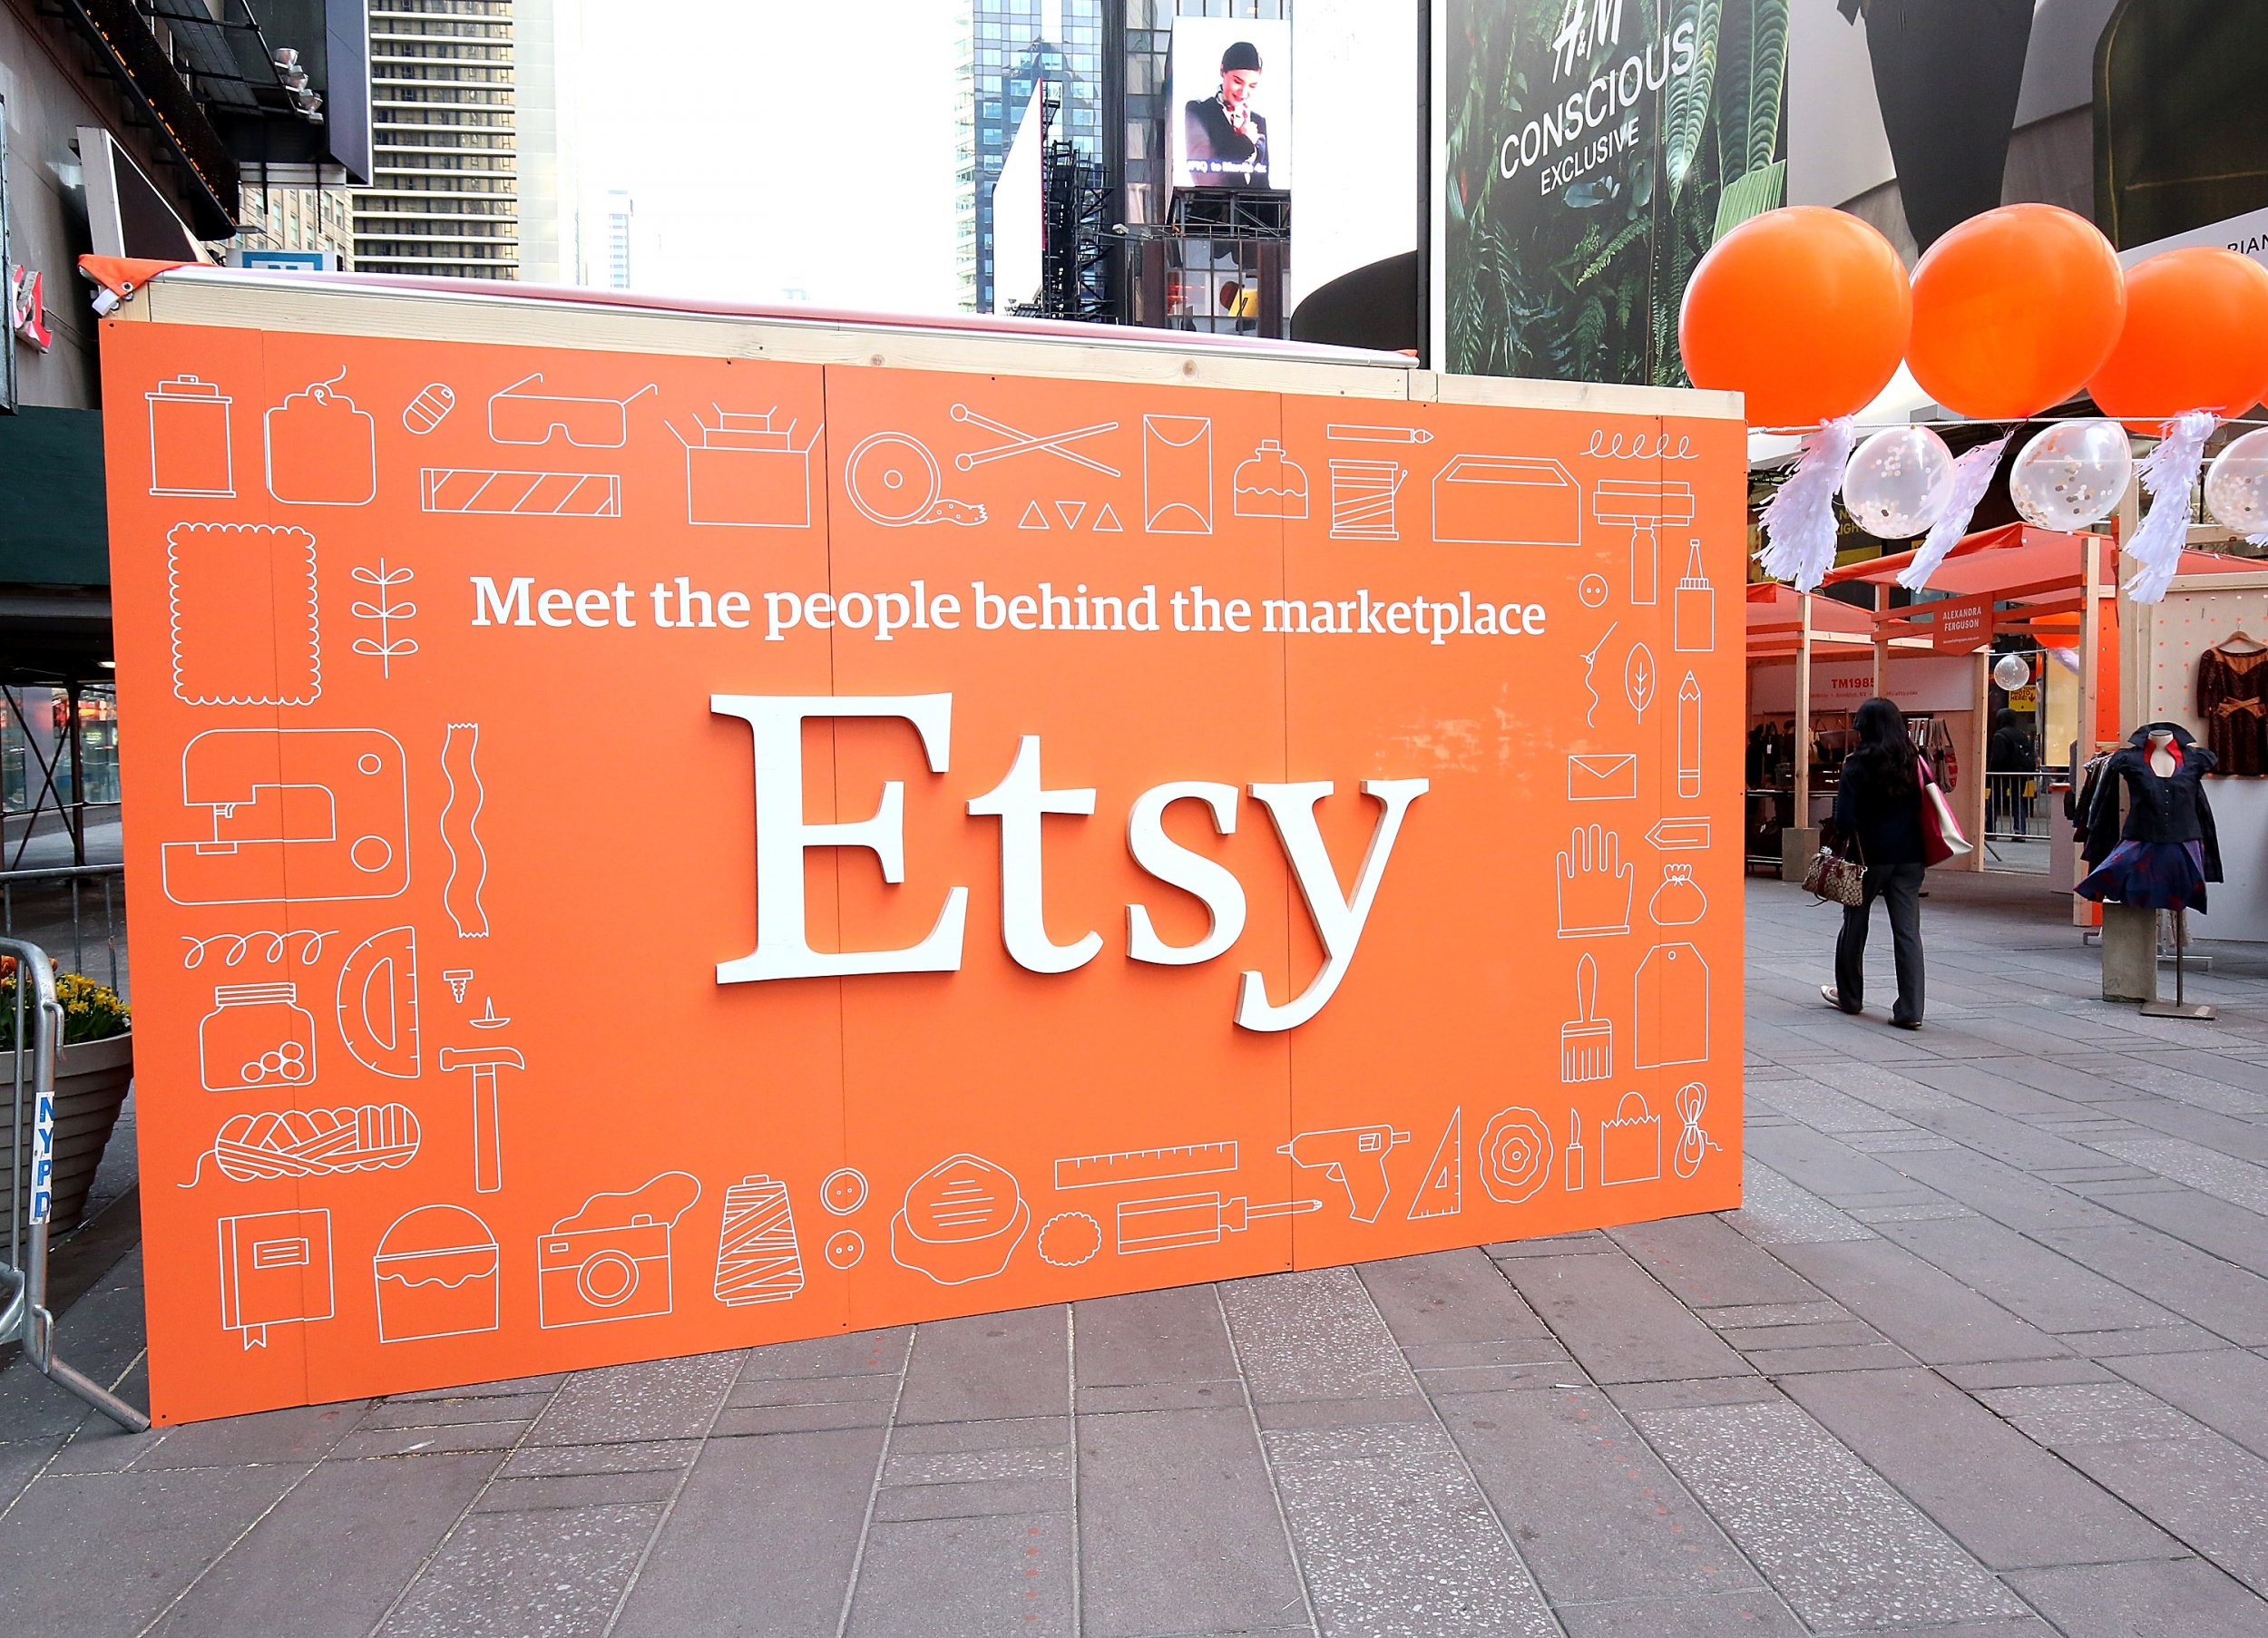 is-etsy-down-users-report-site-outage-issues-checking-shops